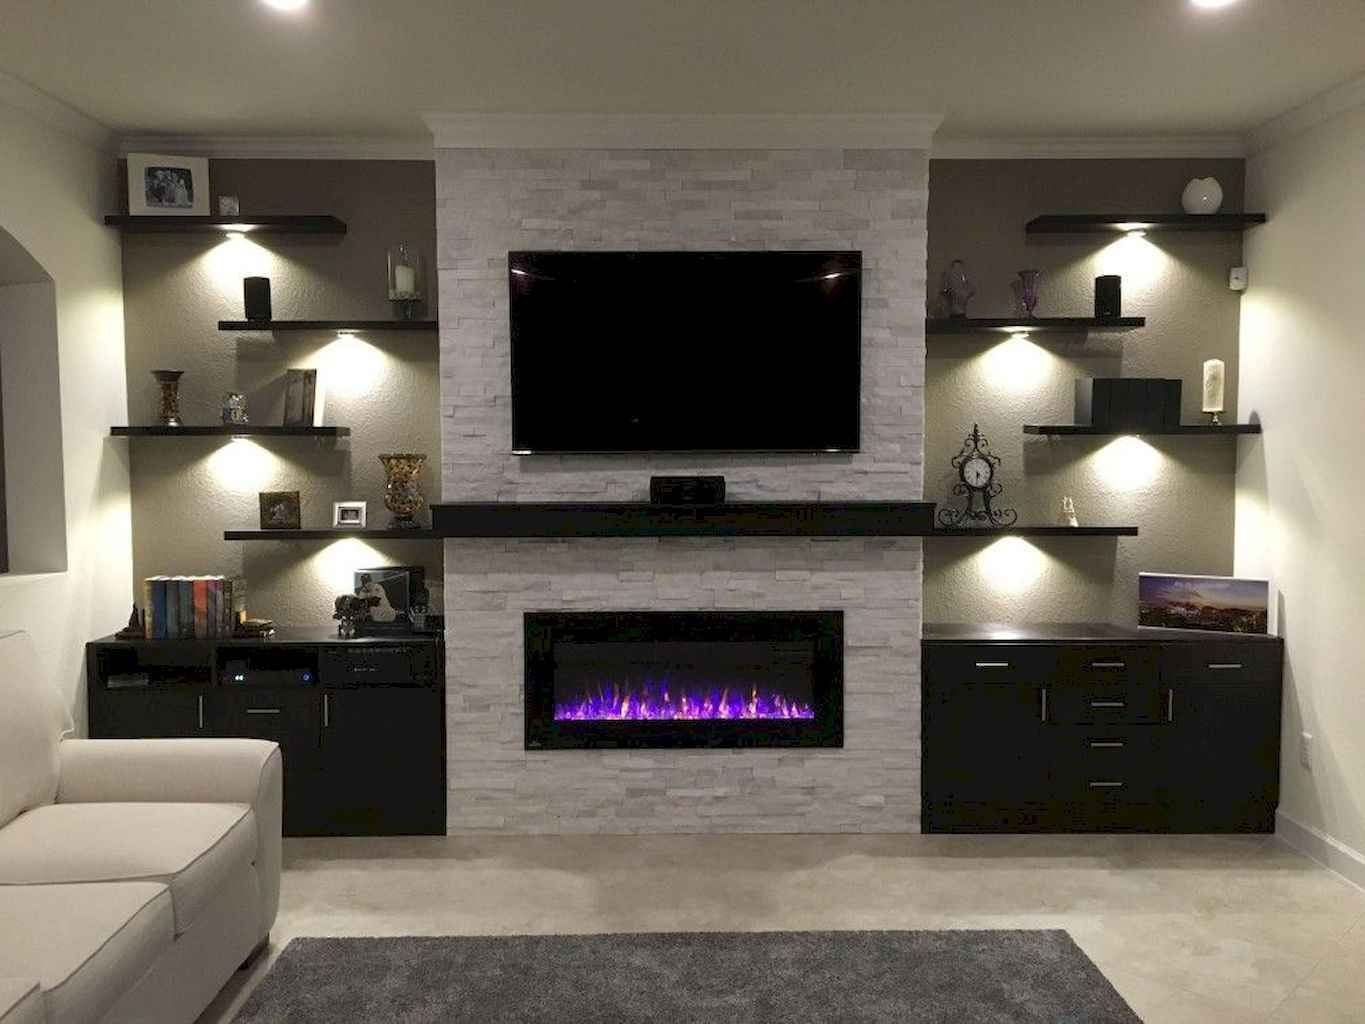 Electric Fireplace with Bookshelves Beautiful 50 Diy Floating Shelves for Living Room Decorating